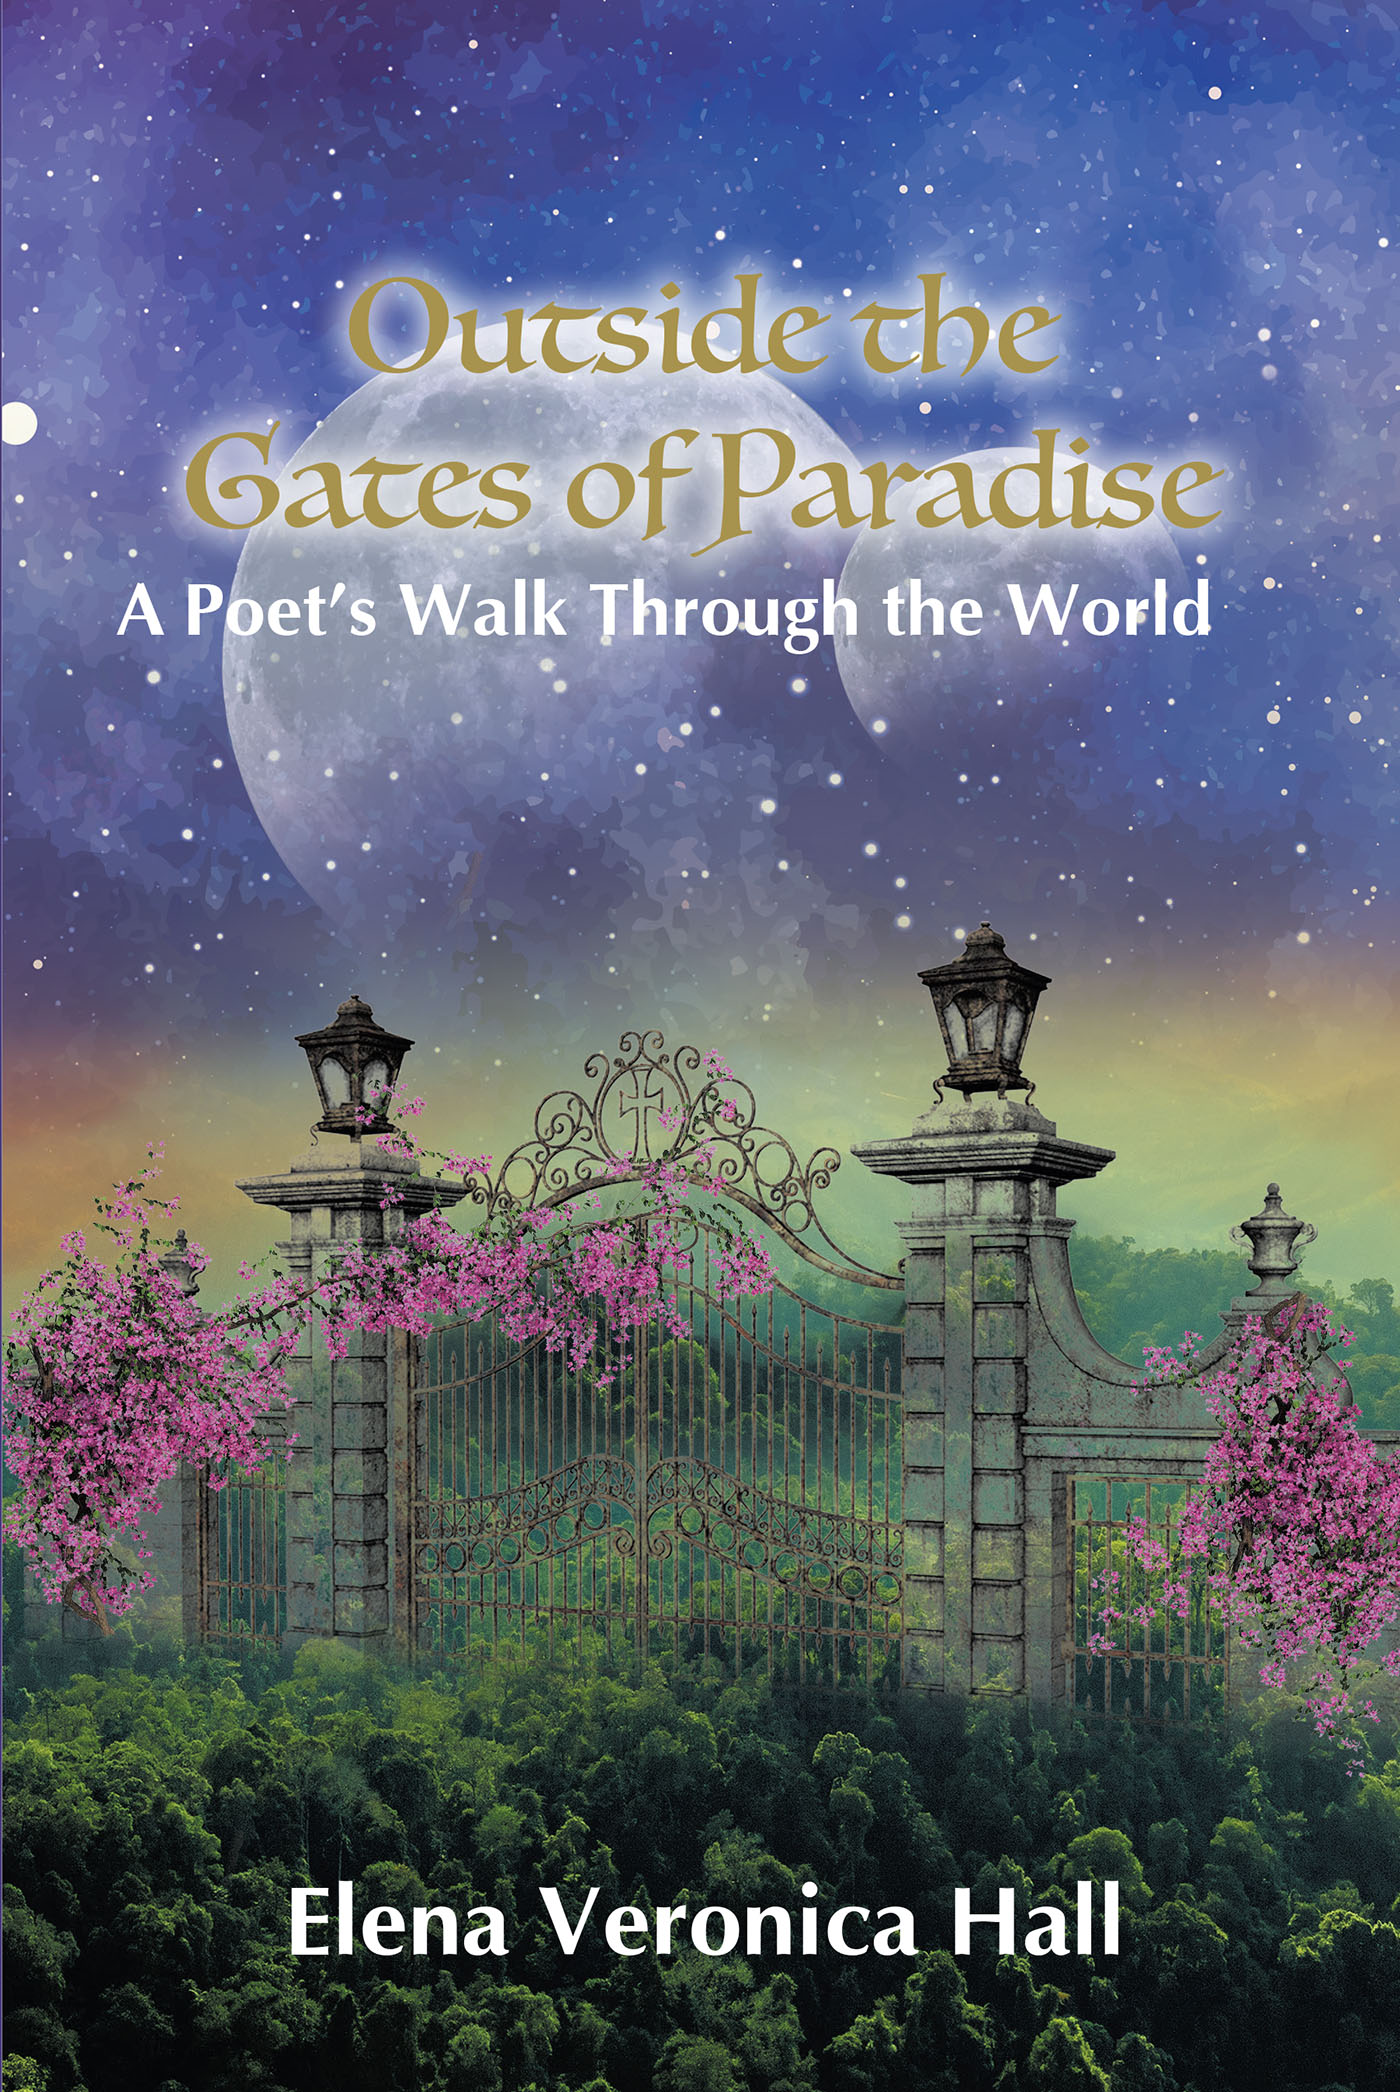 Elena Veronica Hall’s Newly Released “Outside the Gates of Paradise: A Poet’s Walk Through the World” is an Impassioned Collection of Poetry